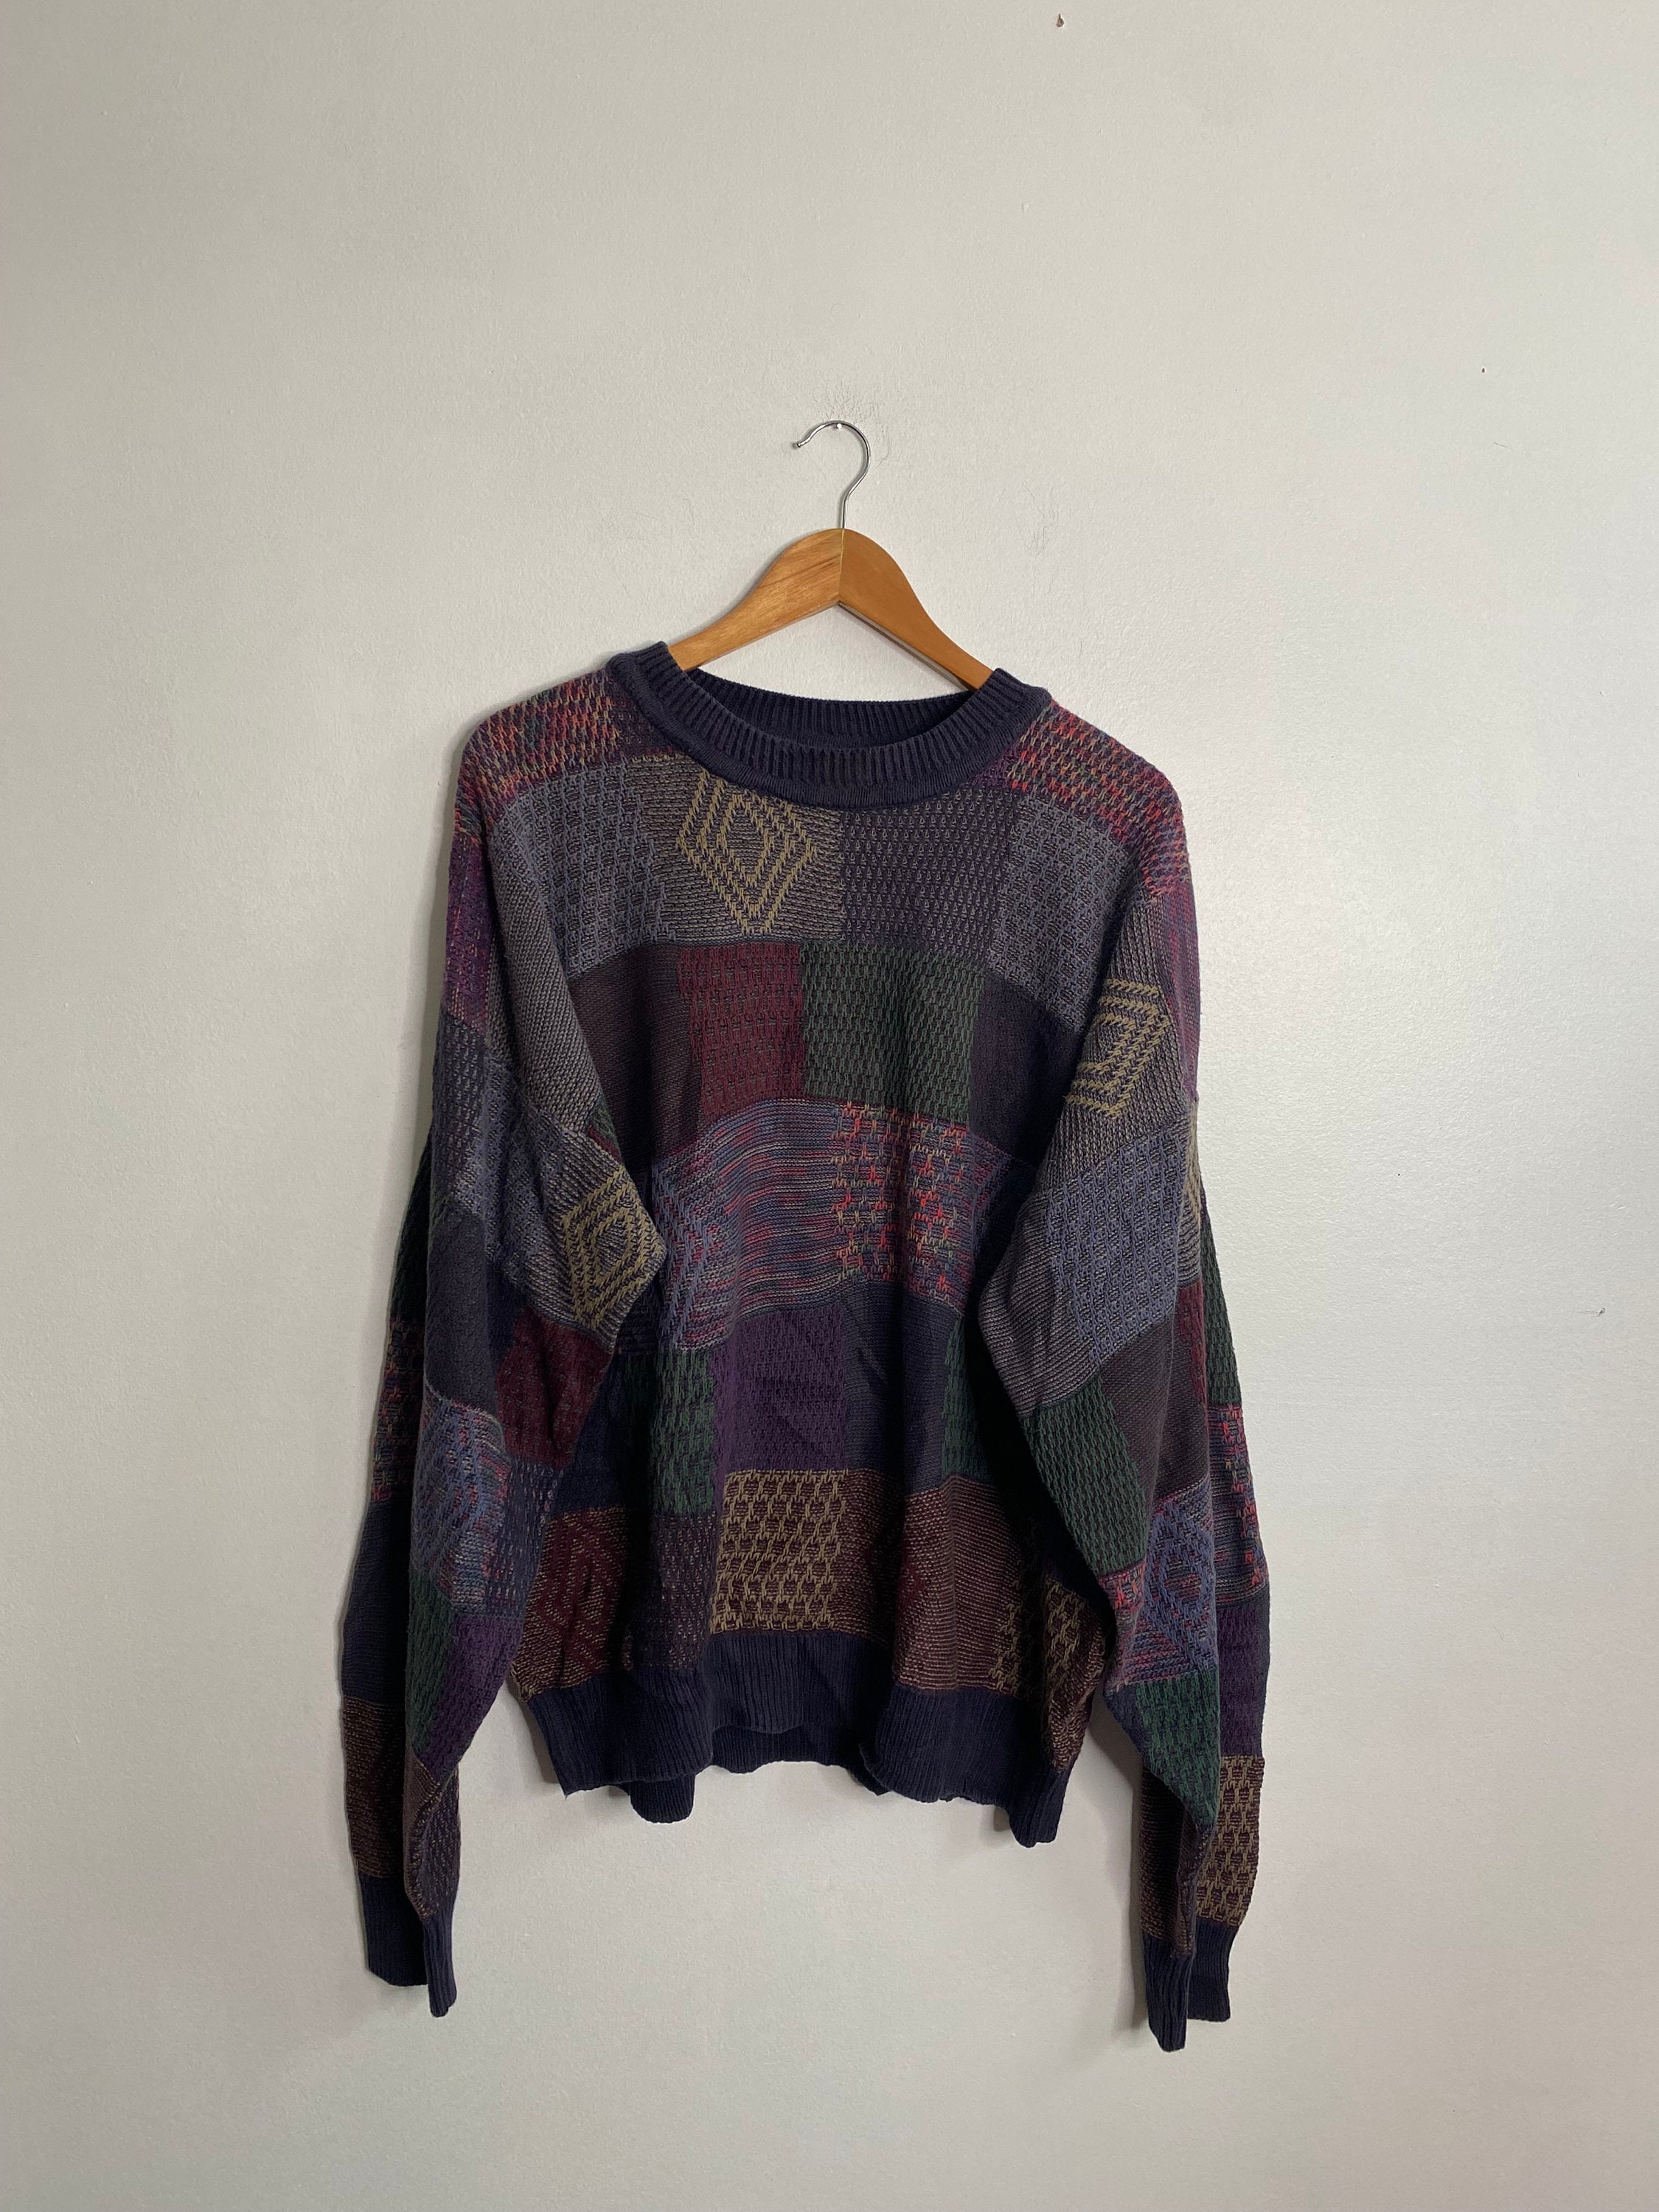 Vintage Knit Sweater Size Large Made in USA - Etsy